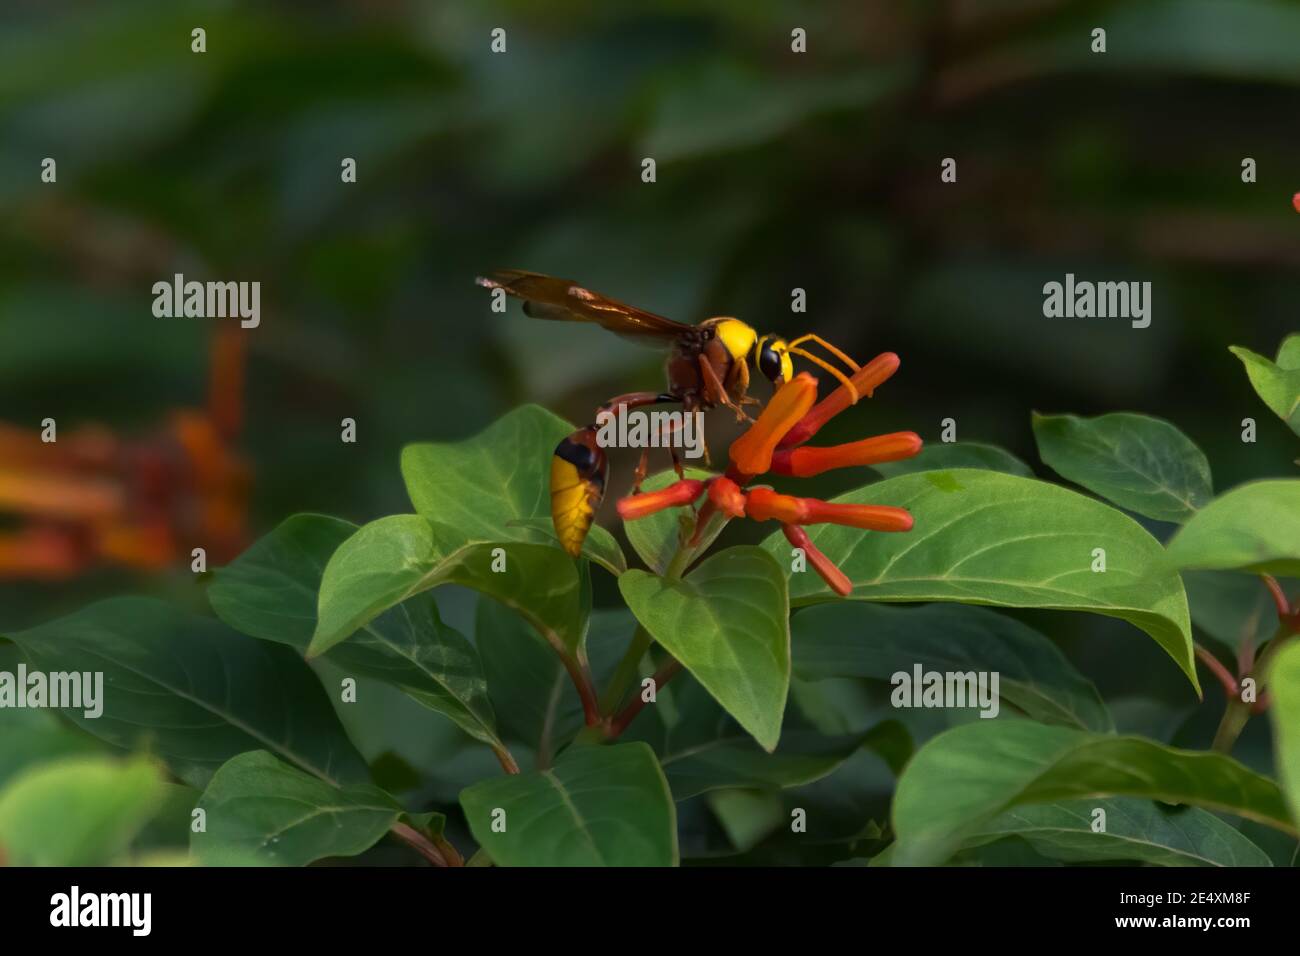 A large and colorful Potter Wasp (Eumeninae), foraging on some orange flowers in the garden. Stock Photo